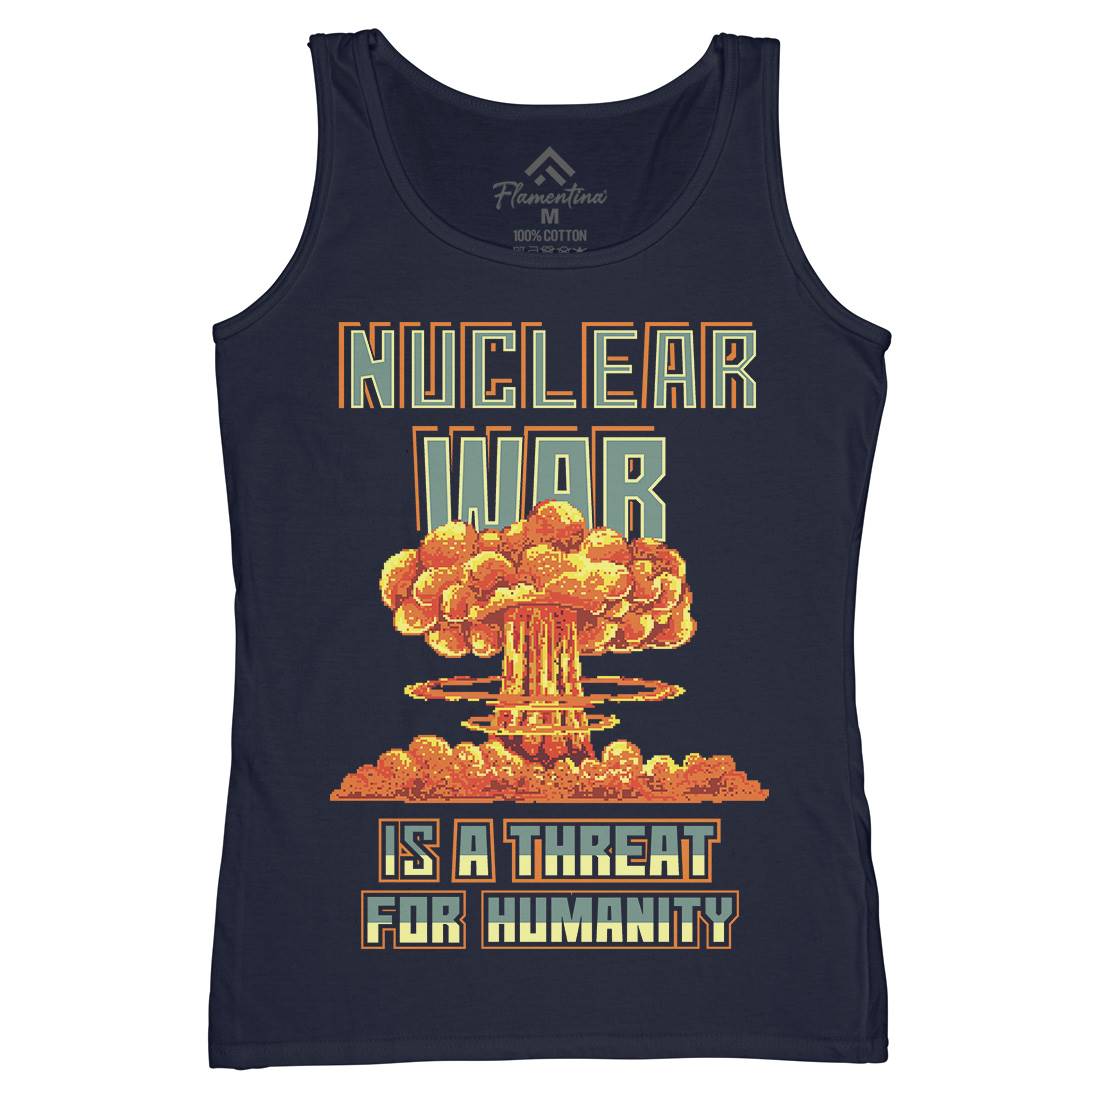 Nuclear War Is A Threat For Humanity Womens Organic Tank Top Vest Army B941